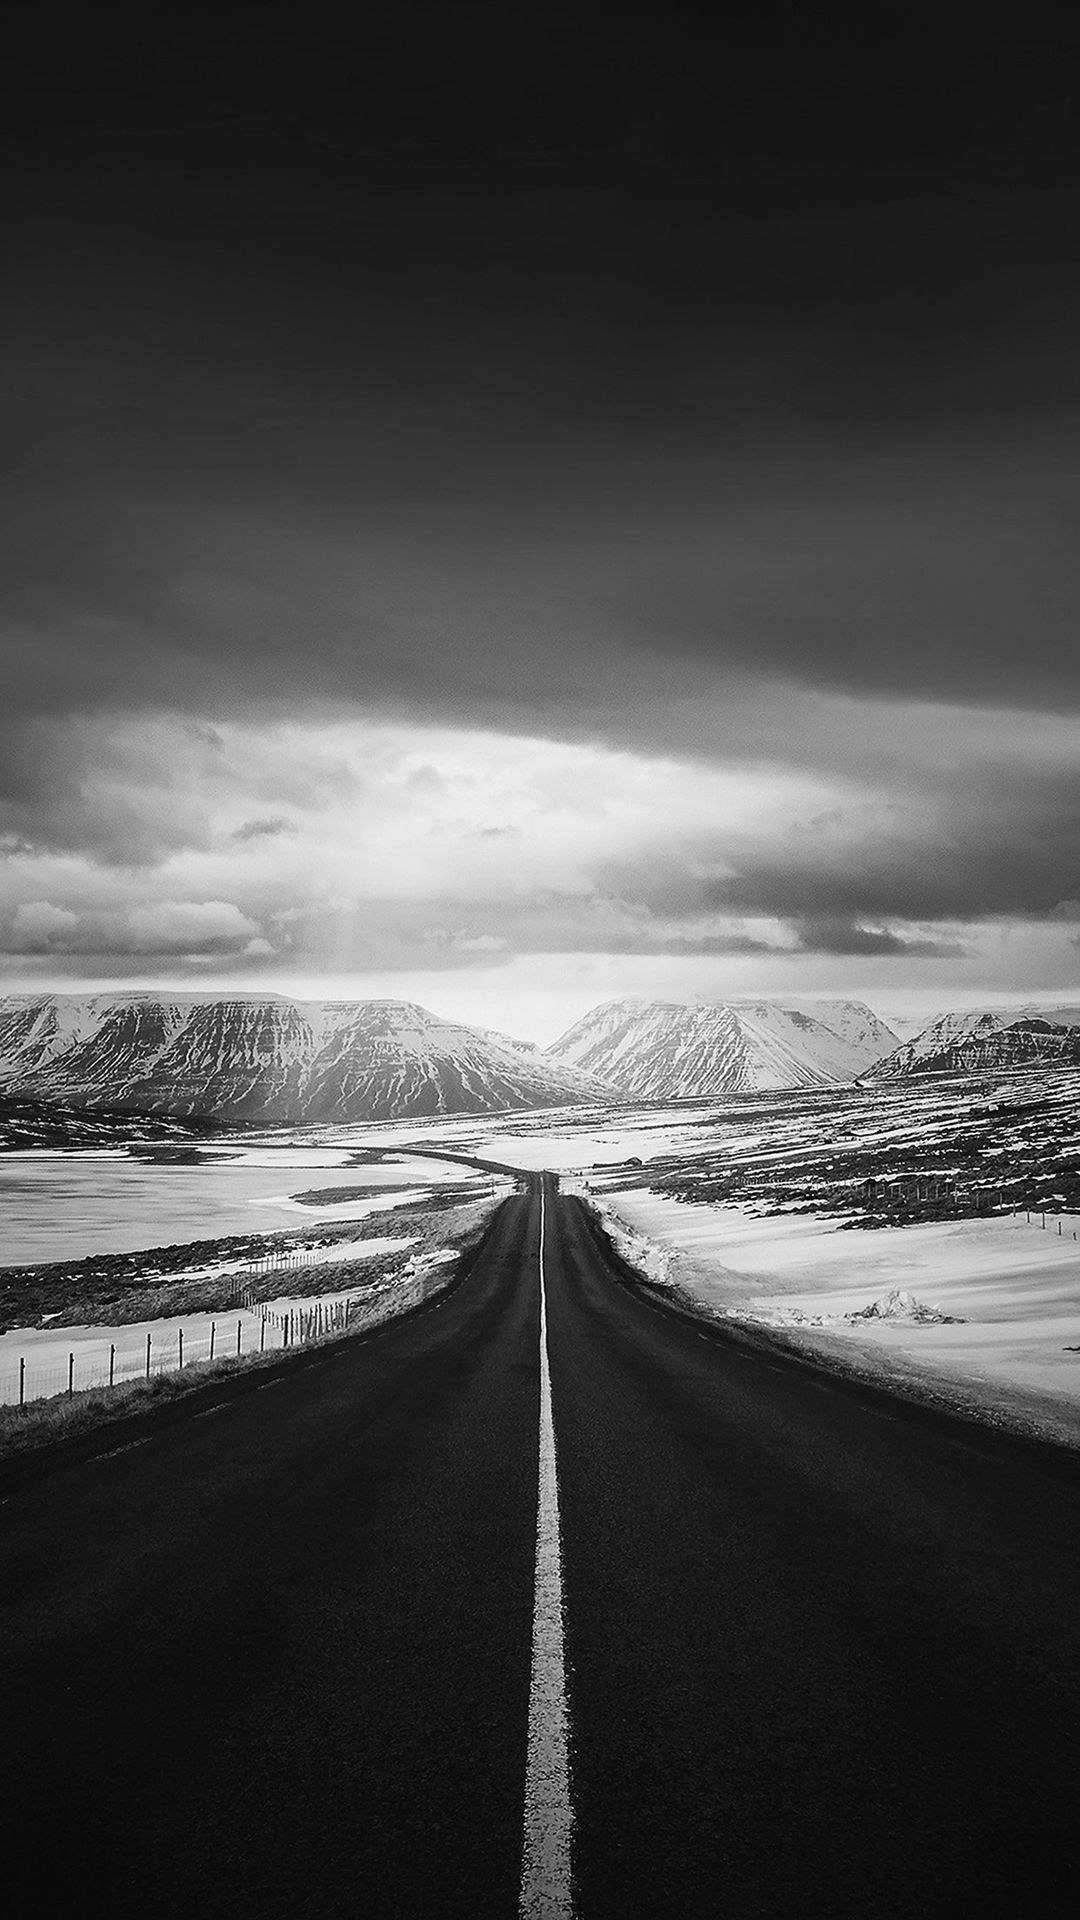 Road To Heaven Snow Mountain Dark Nature Winter iPhone 6 Wallpaper Download.. Cool background wallpaper, Background phone wallpaper, iPhone 6 plus wallpaper